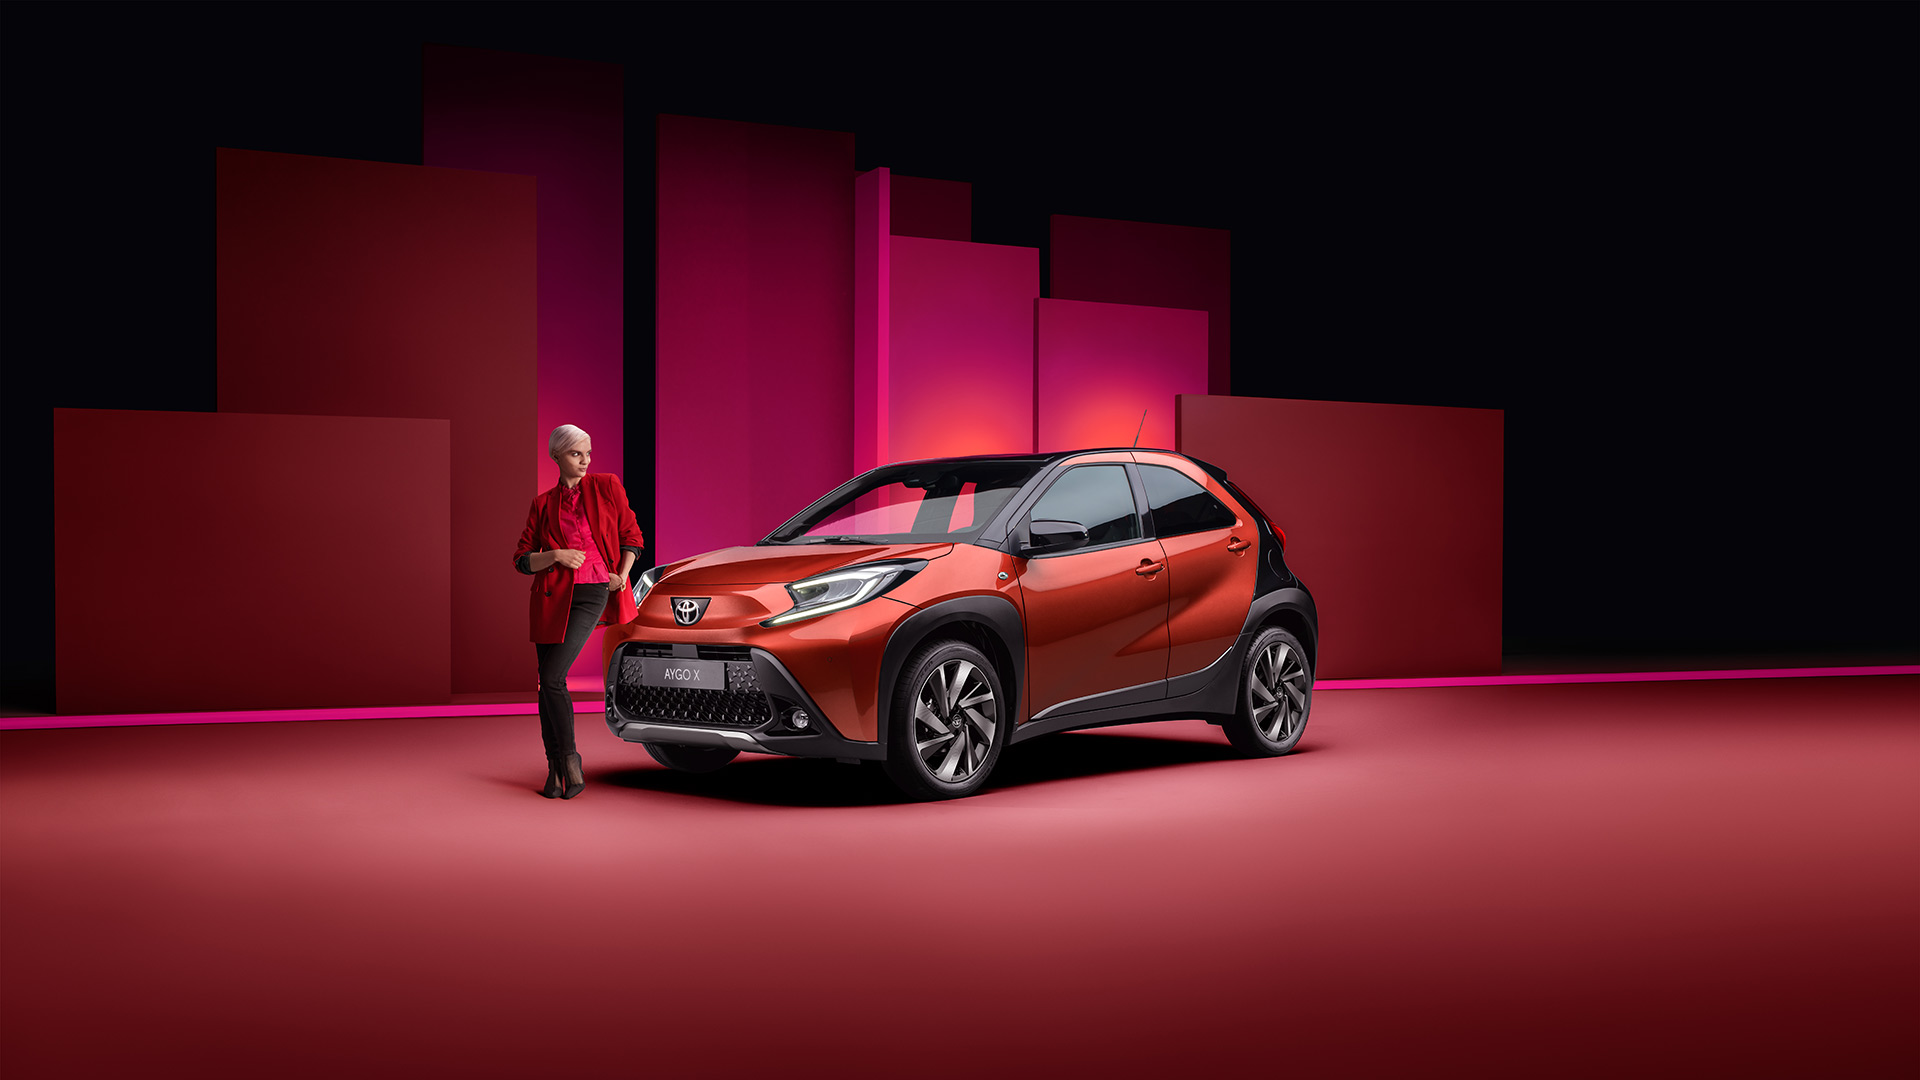 Toyota aygo private lease